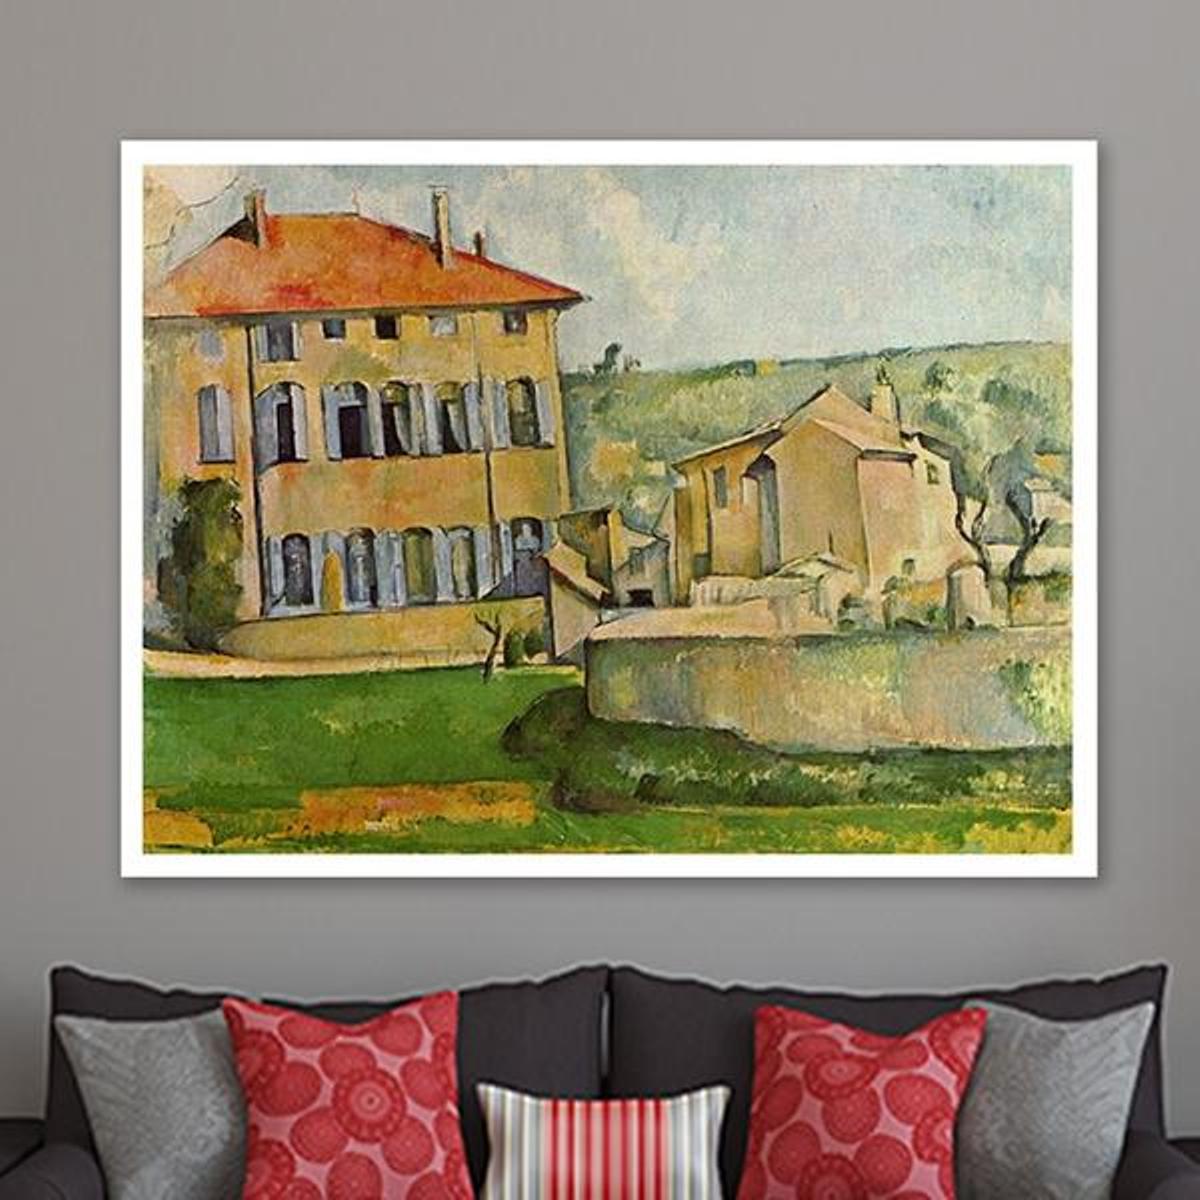 House and Farm at Jas de Bouffan by Paul Cezanne - Van-Go Paint-By-Number Kit